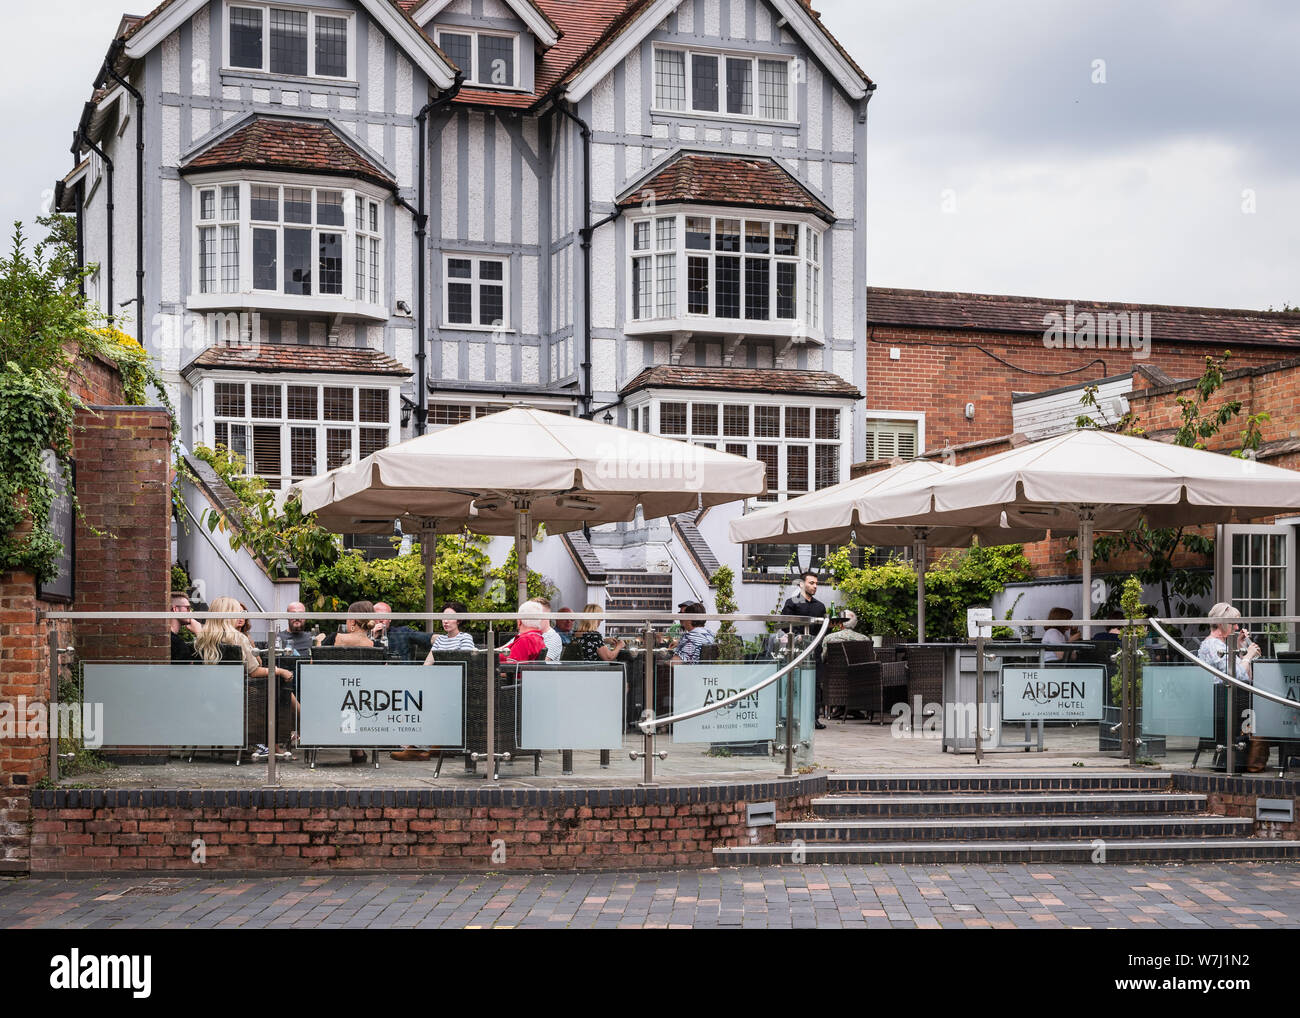 Cafes and restaurants. An exterior view of The Arden Hotel terrace with outside diners under sunshades. Stock Photo